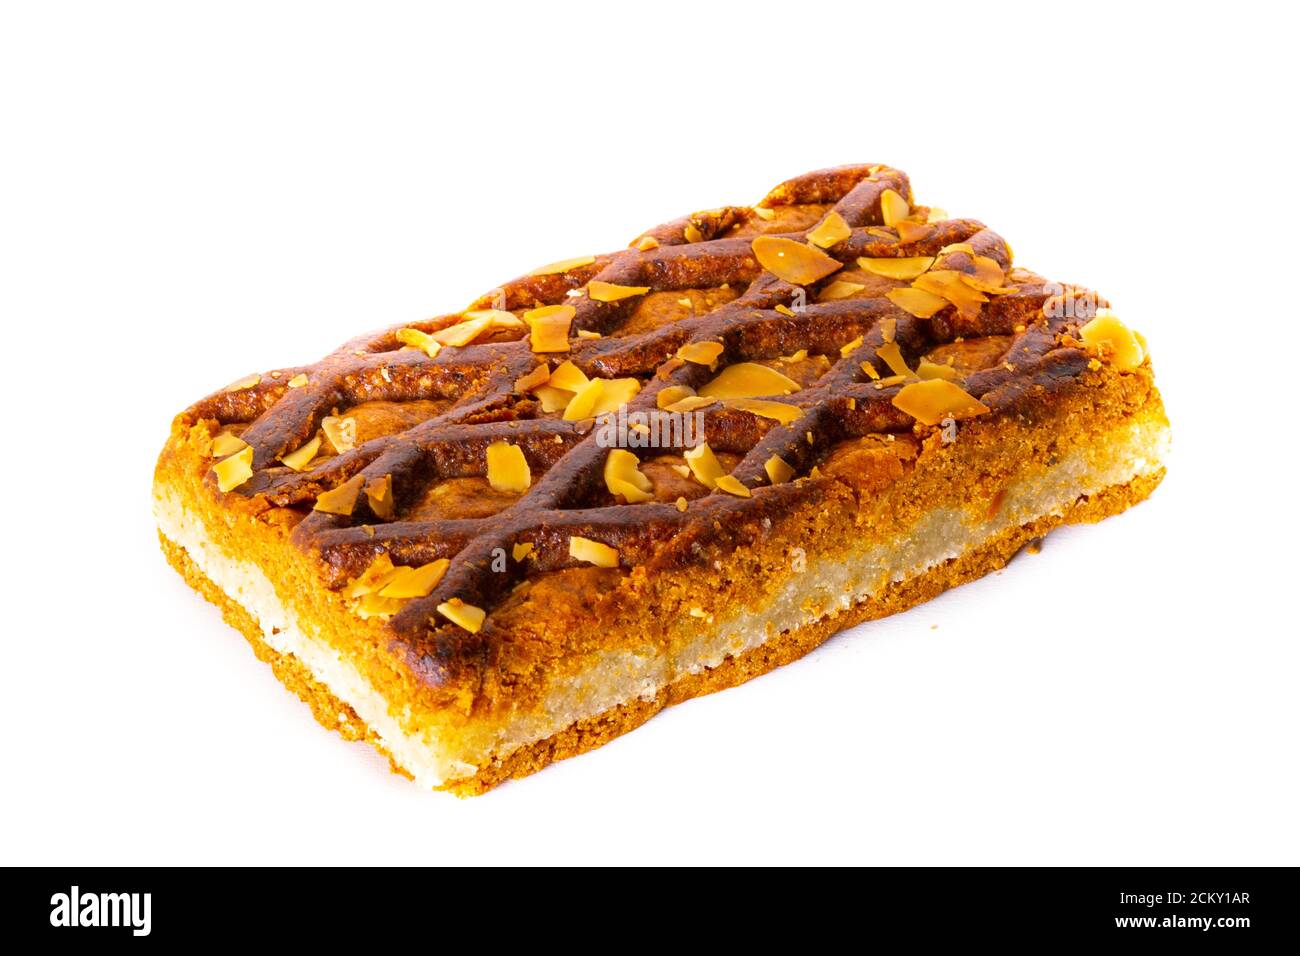 Gevulde speculaas (brown spiced biscuit), a traditional Dutch Sinterklaas/Holiday snack, on white Stock Photo